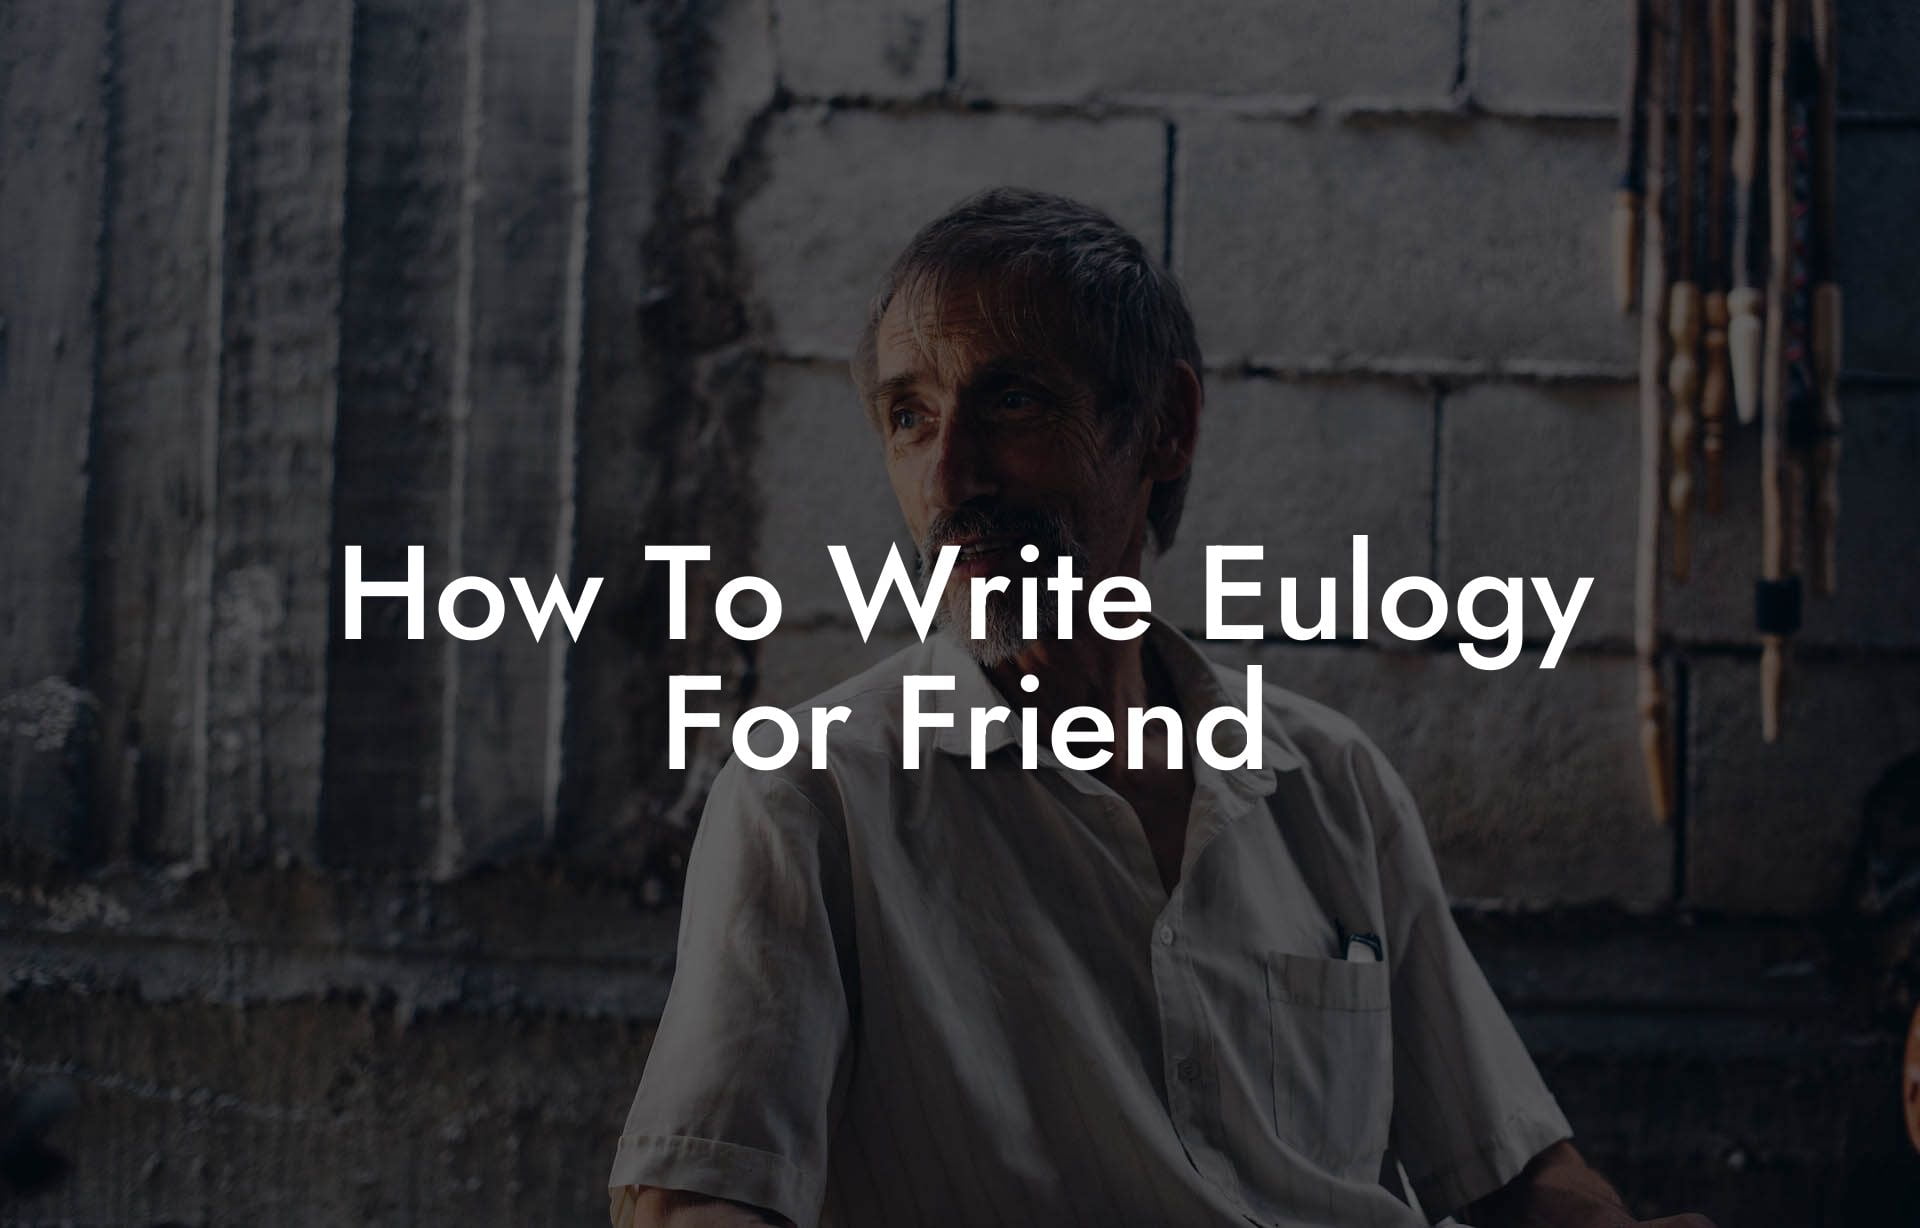 How To Write Eulogy For Friend